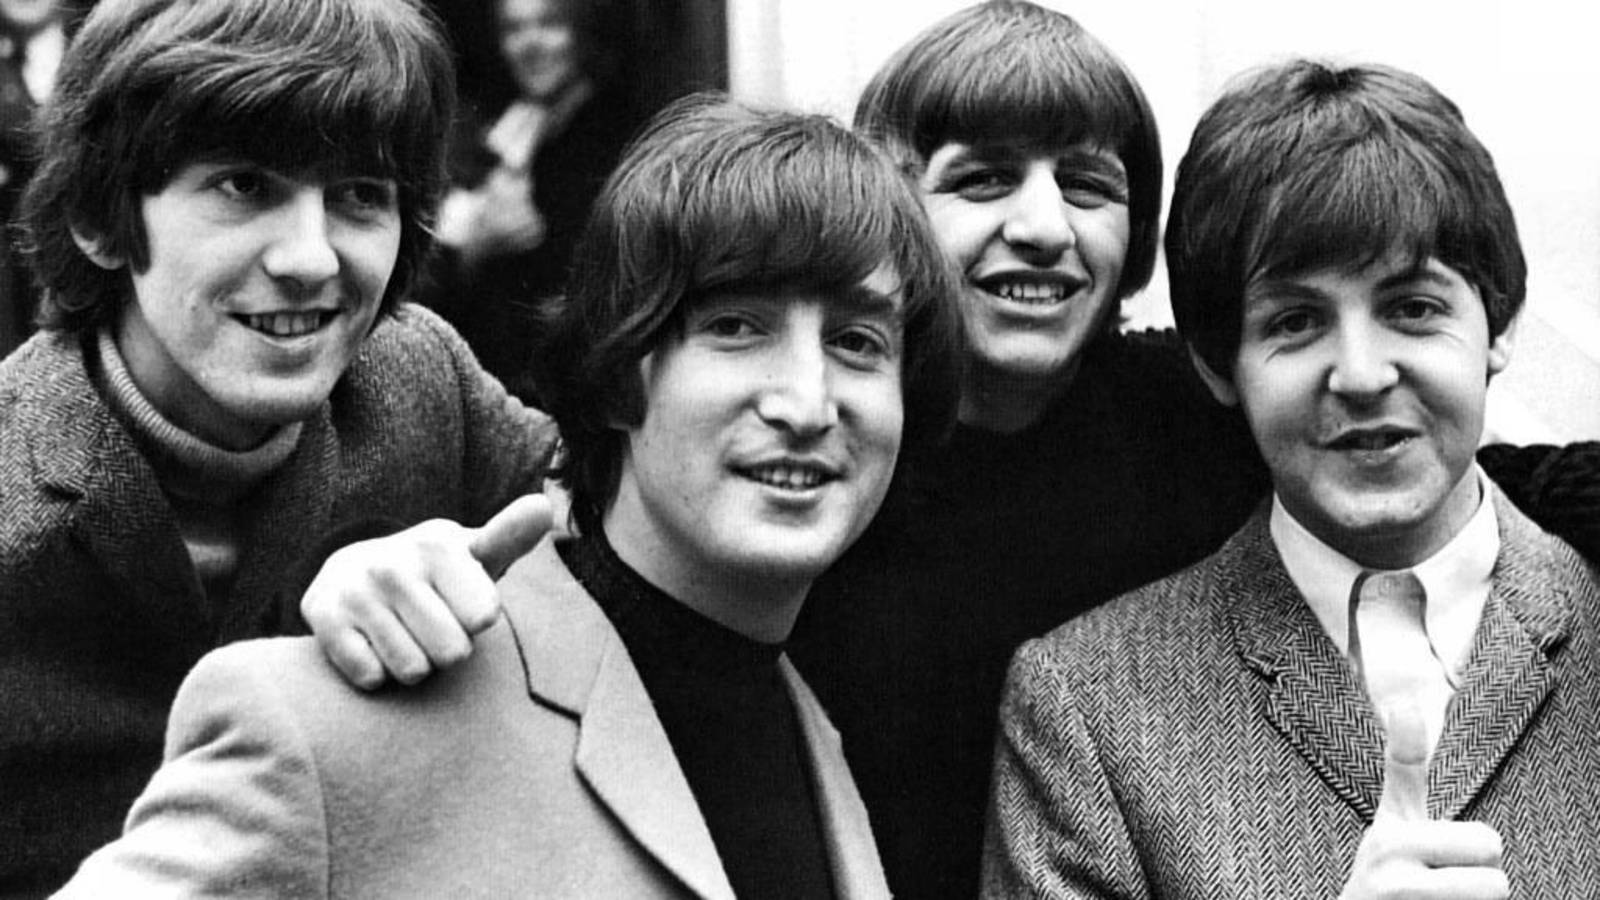 The Beatles Together Wallpaper